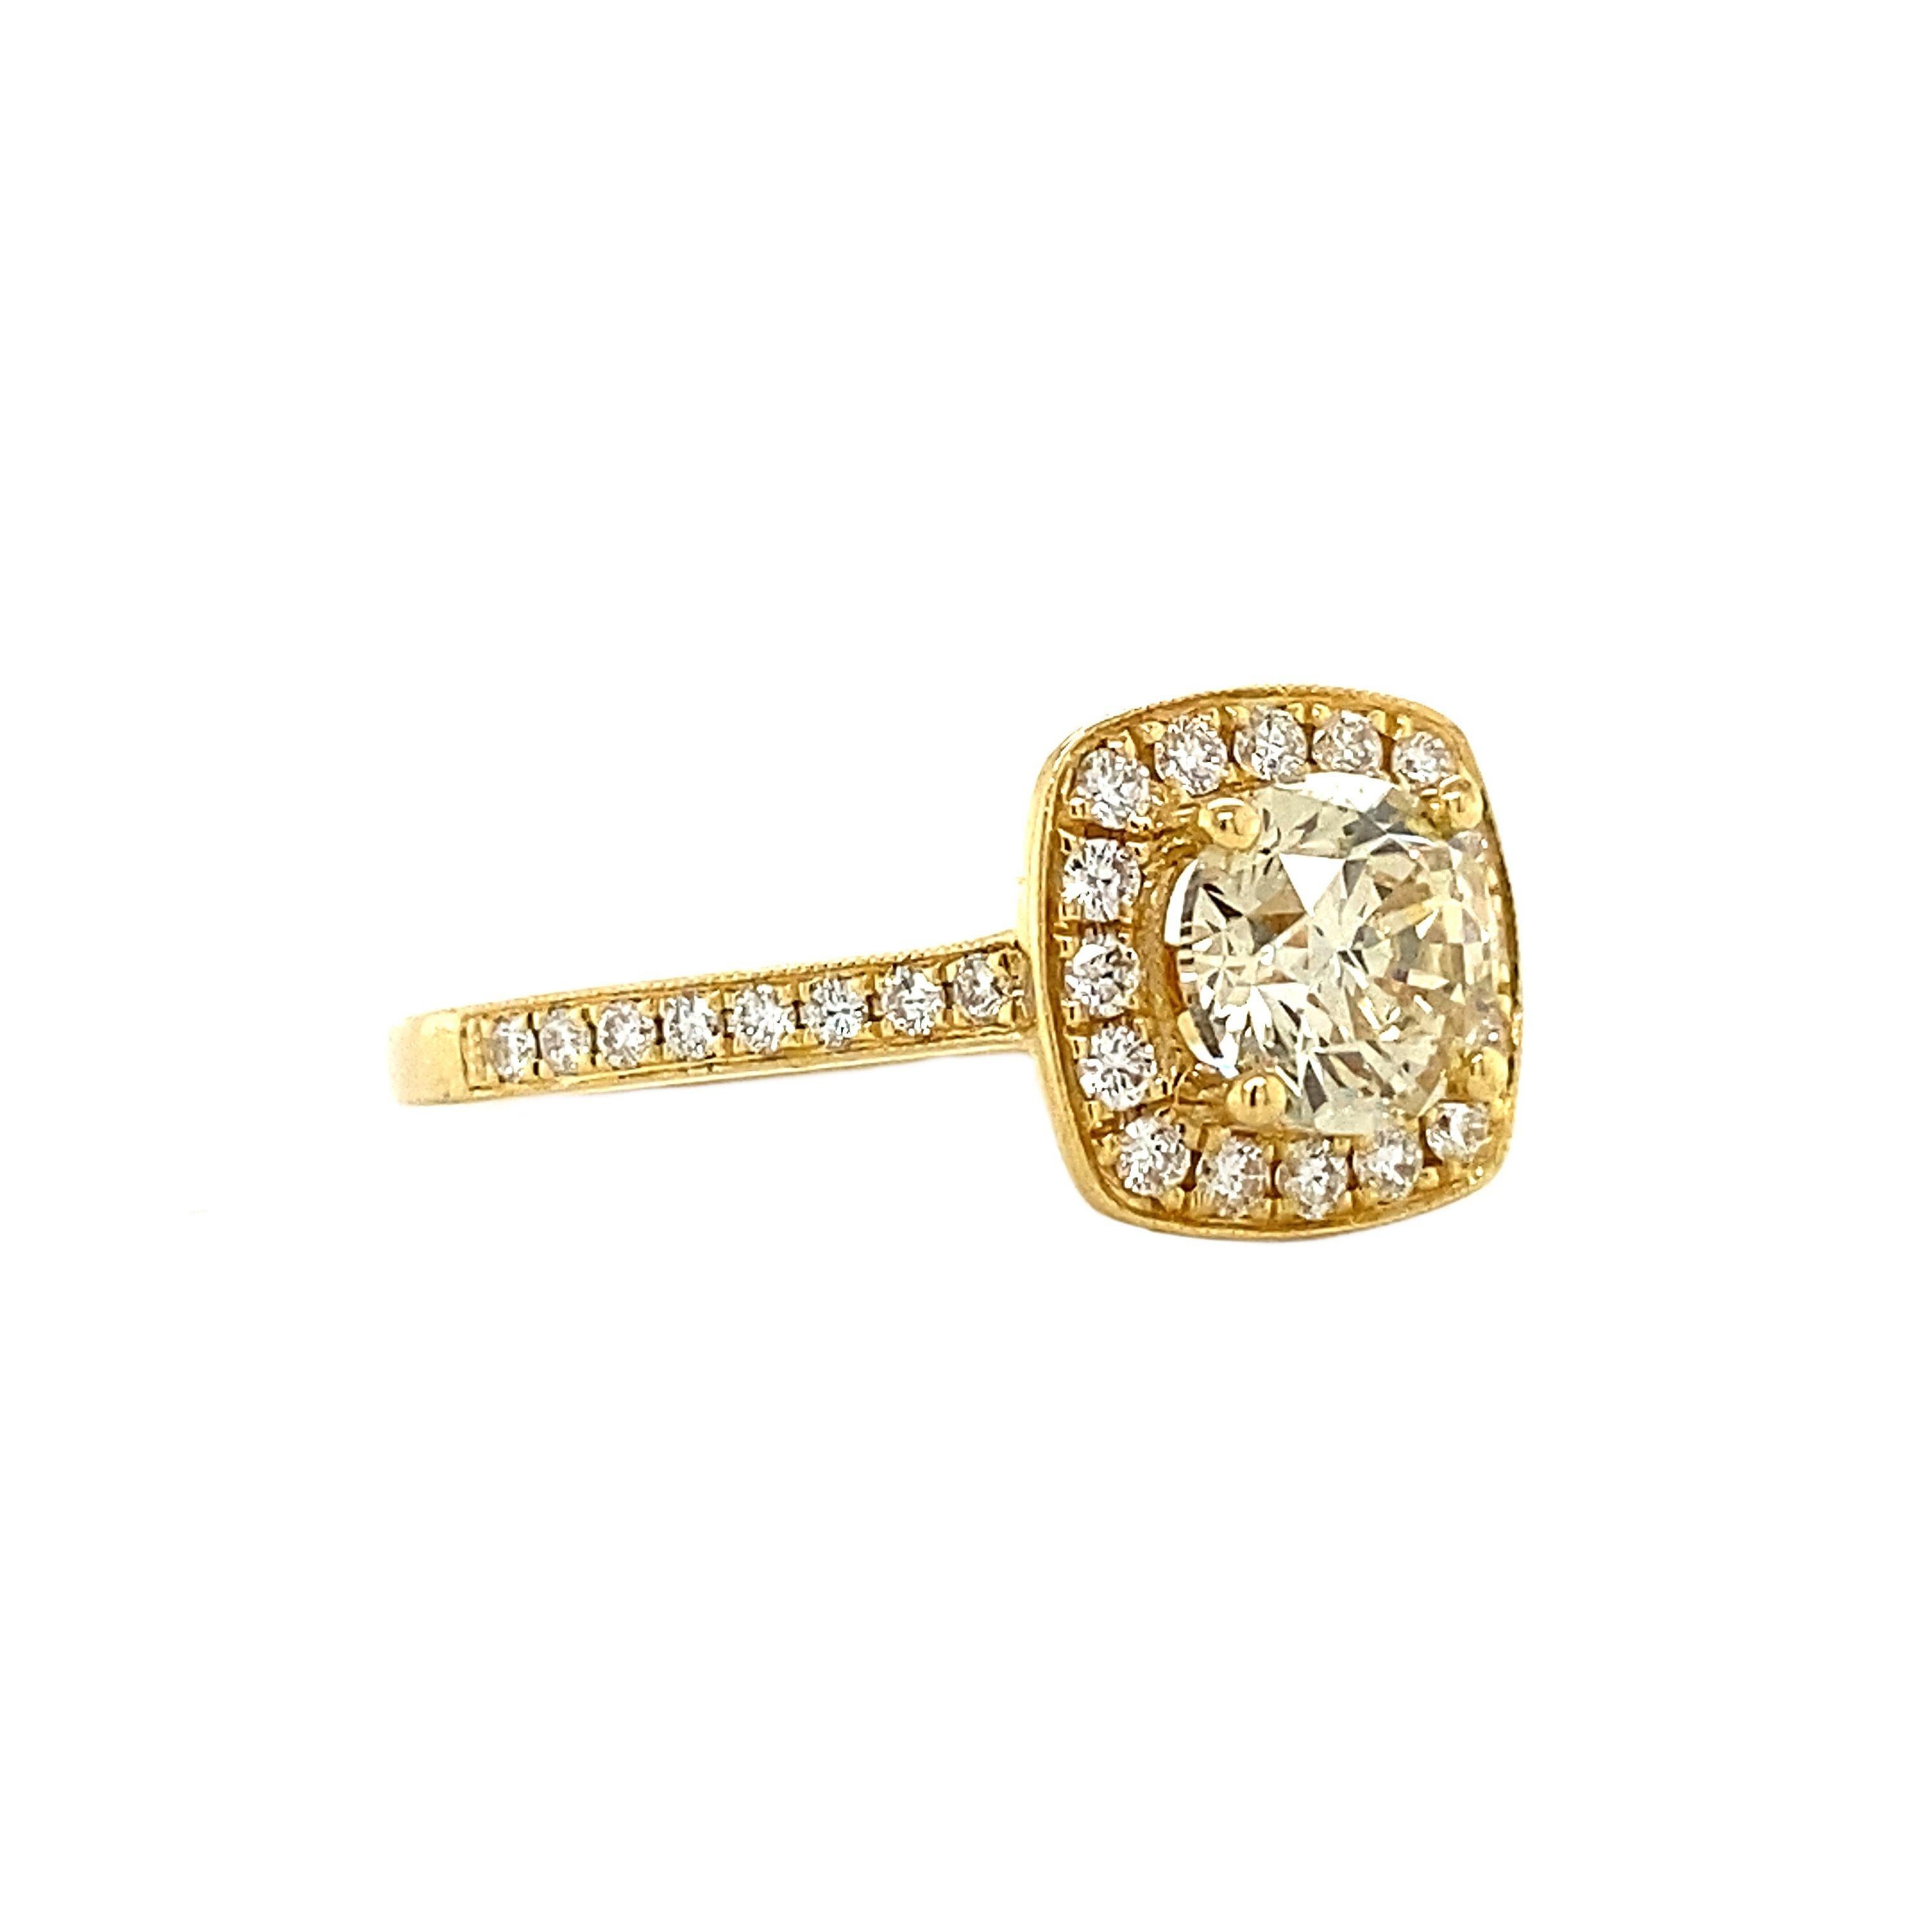 This 18 carat yellow gold NEW ring is set with a diamond of 1.01 carat in the middle. In the band and around the middle diamond are 32 diamonds of 0.29 carat. They are all brilliant cut. This concerns a new ring. The ring size can be adjusted.